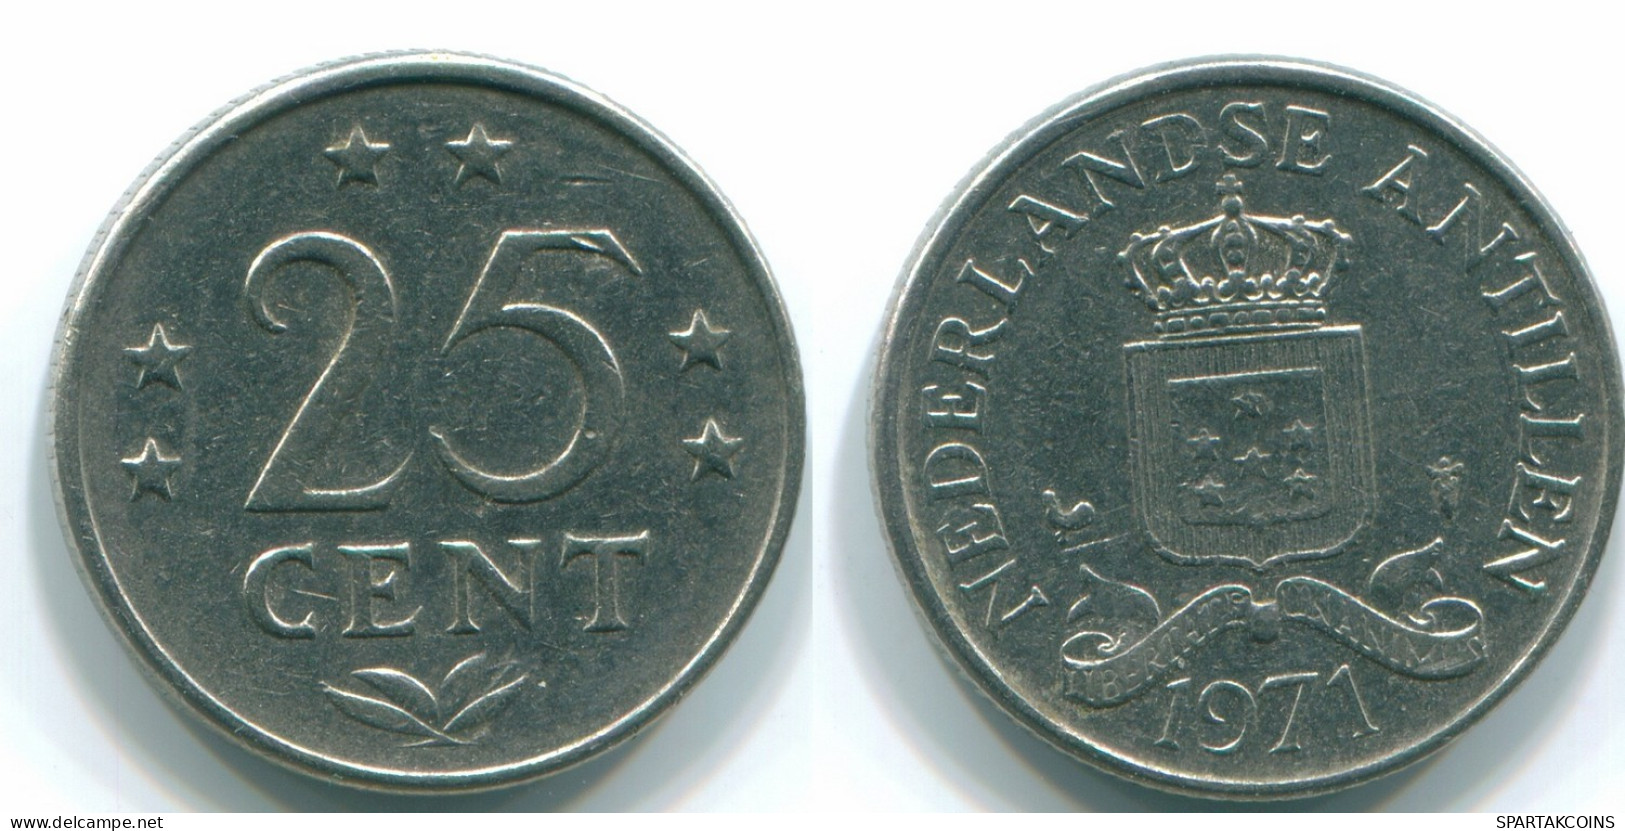 25 CENTS 1971 NETHERLANDS ANTILLES Nickel Colonial Coin #S11548.U.A - Netherlands Antilles